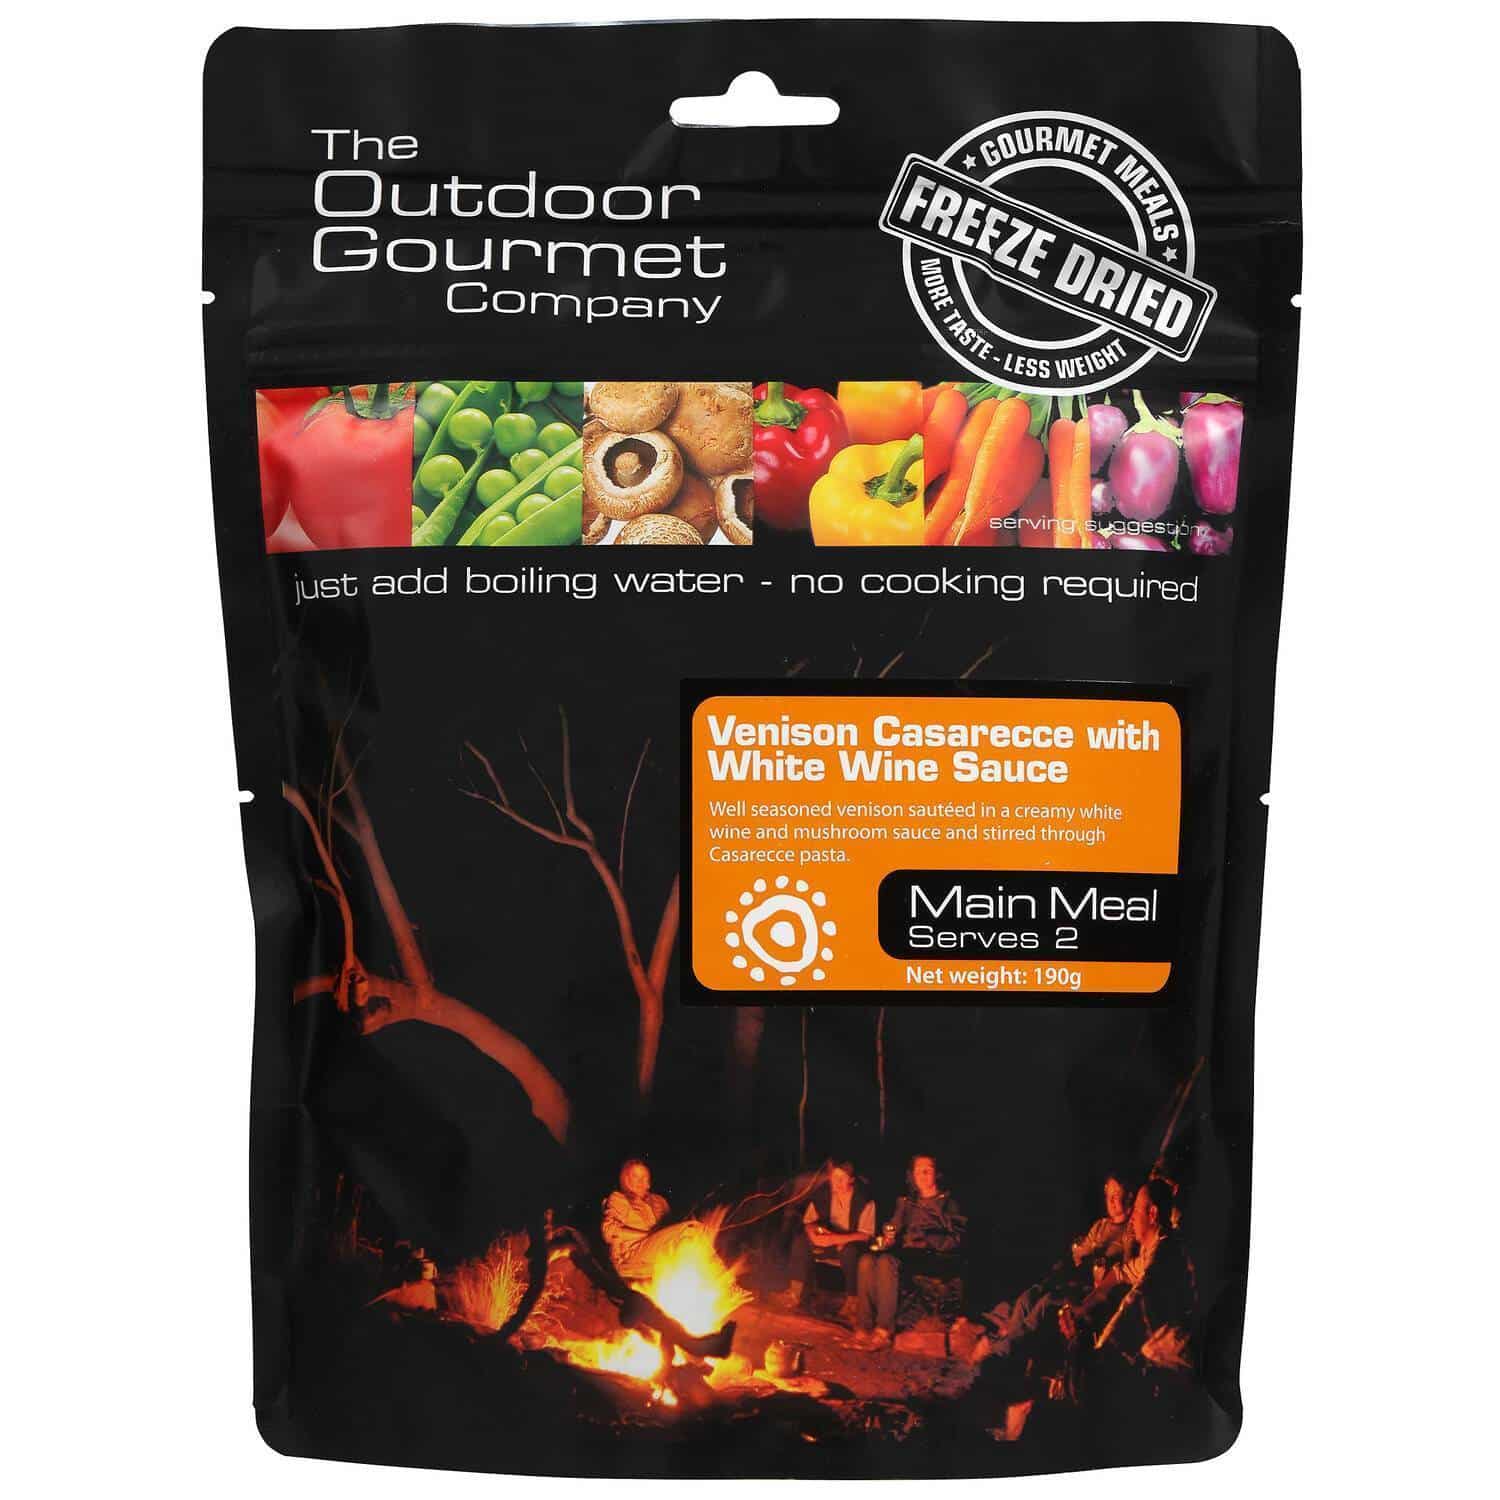 The Outdoor Gourmet Co. Venison Casarece with White Wine Sauce - Tramping Food and Accessories sold by Venture Outdoors NZ